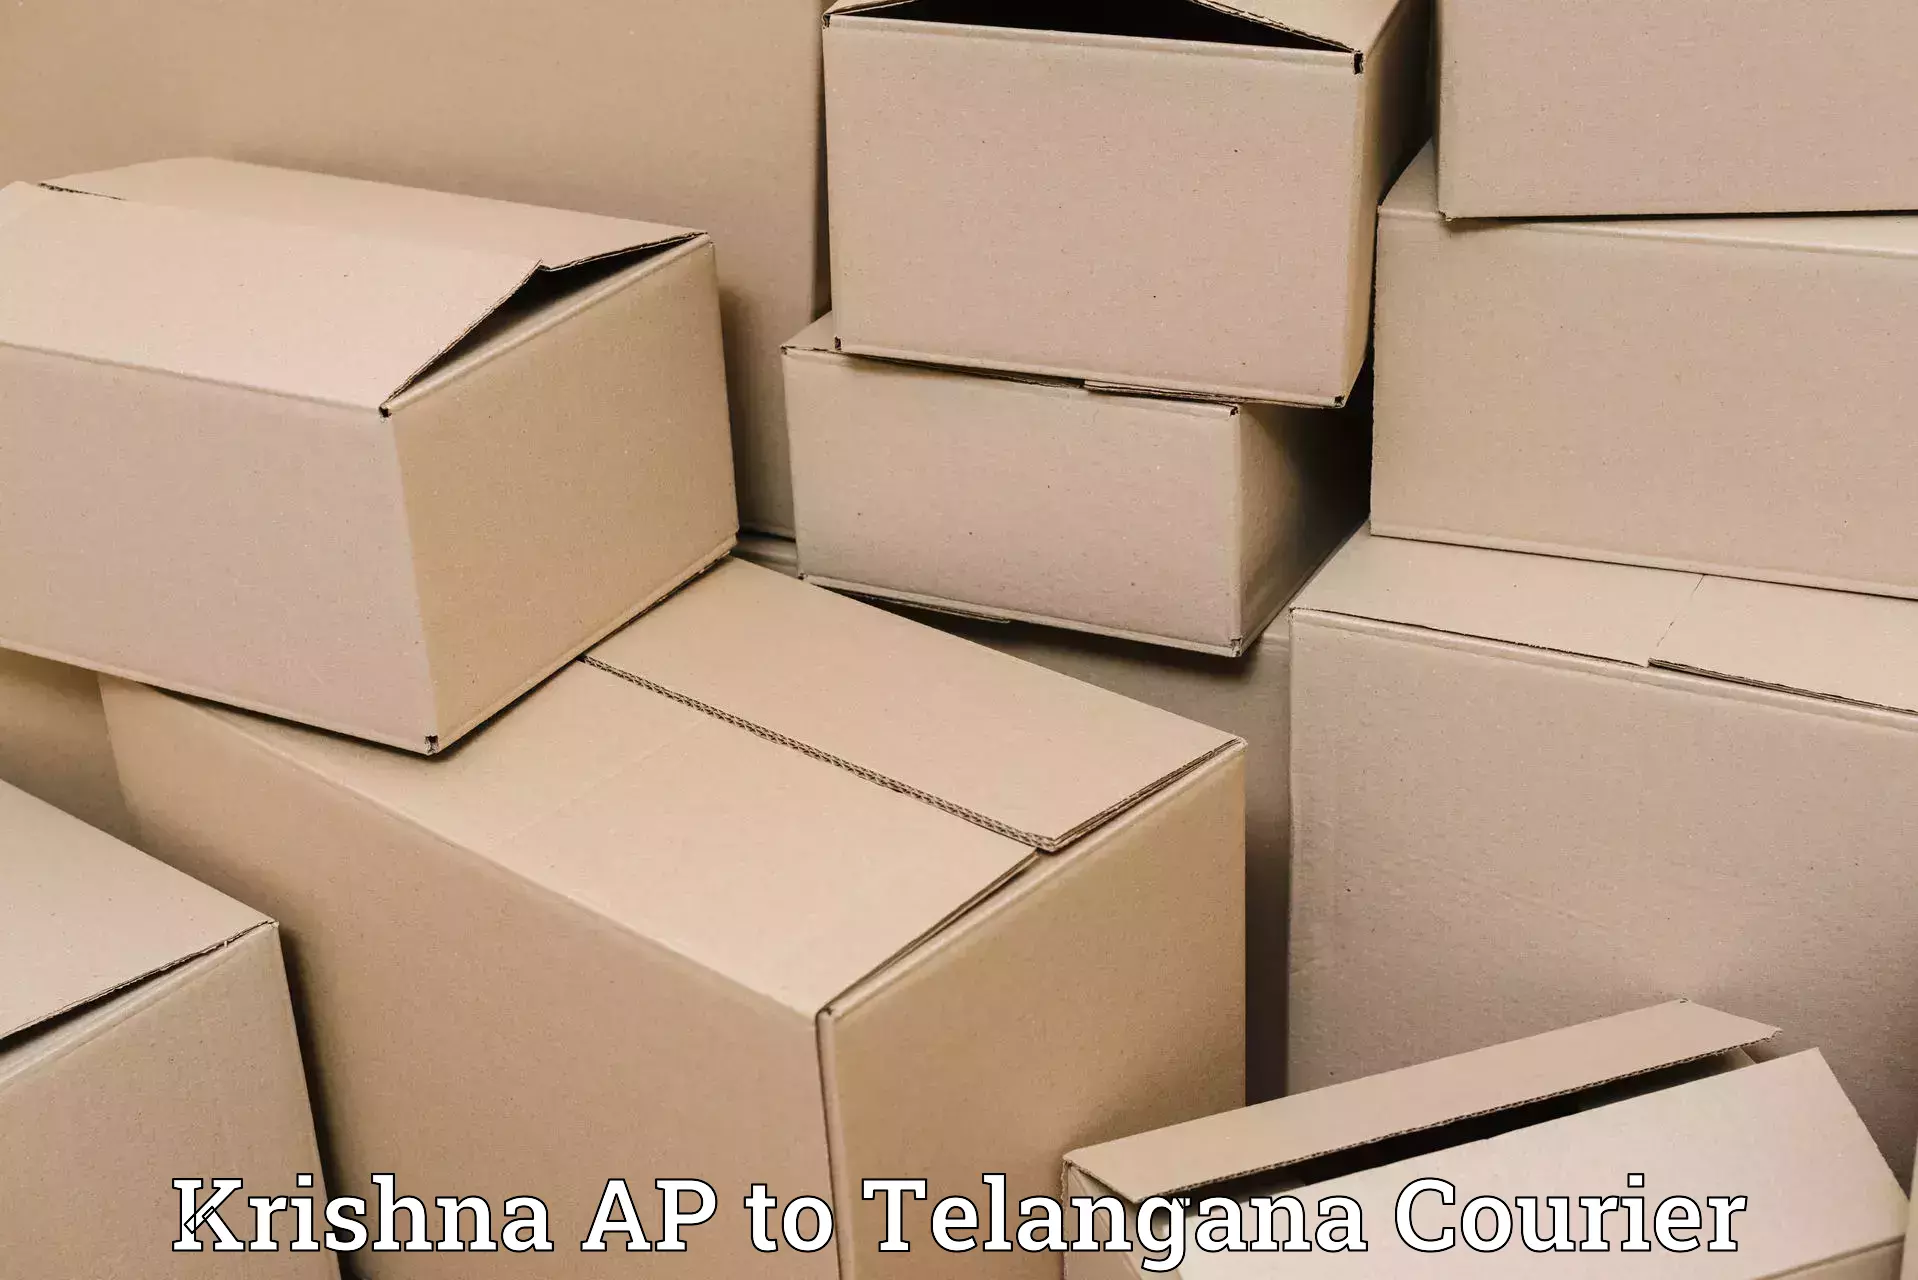 State-of-the-art courier technology Krishna AP to Jainad